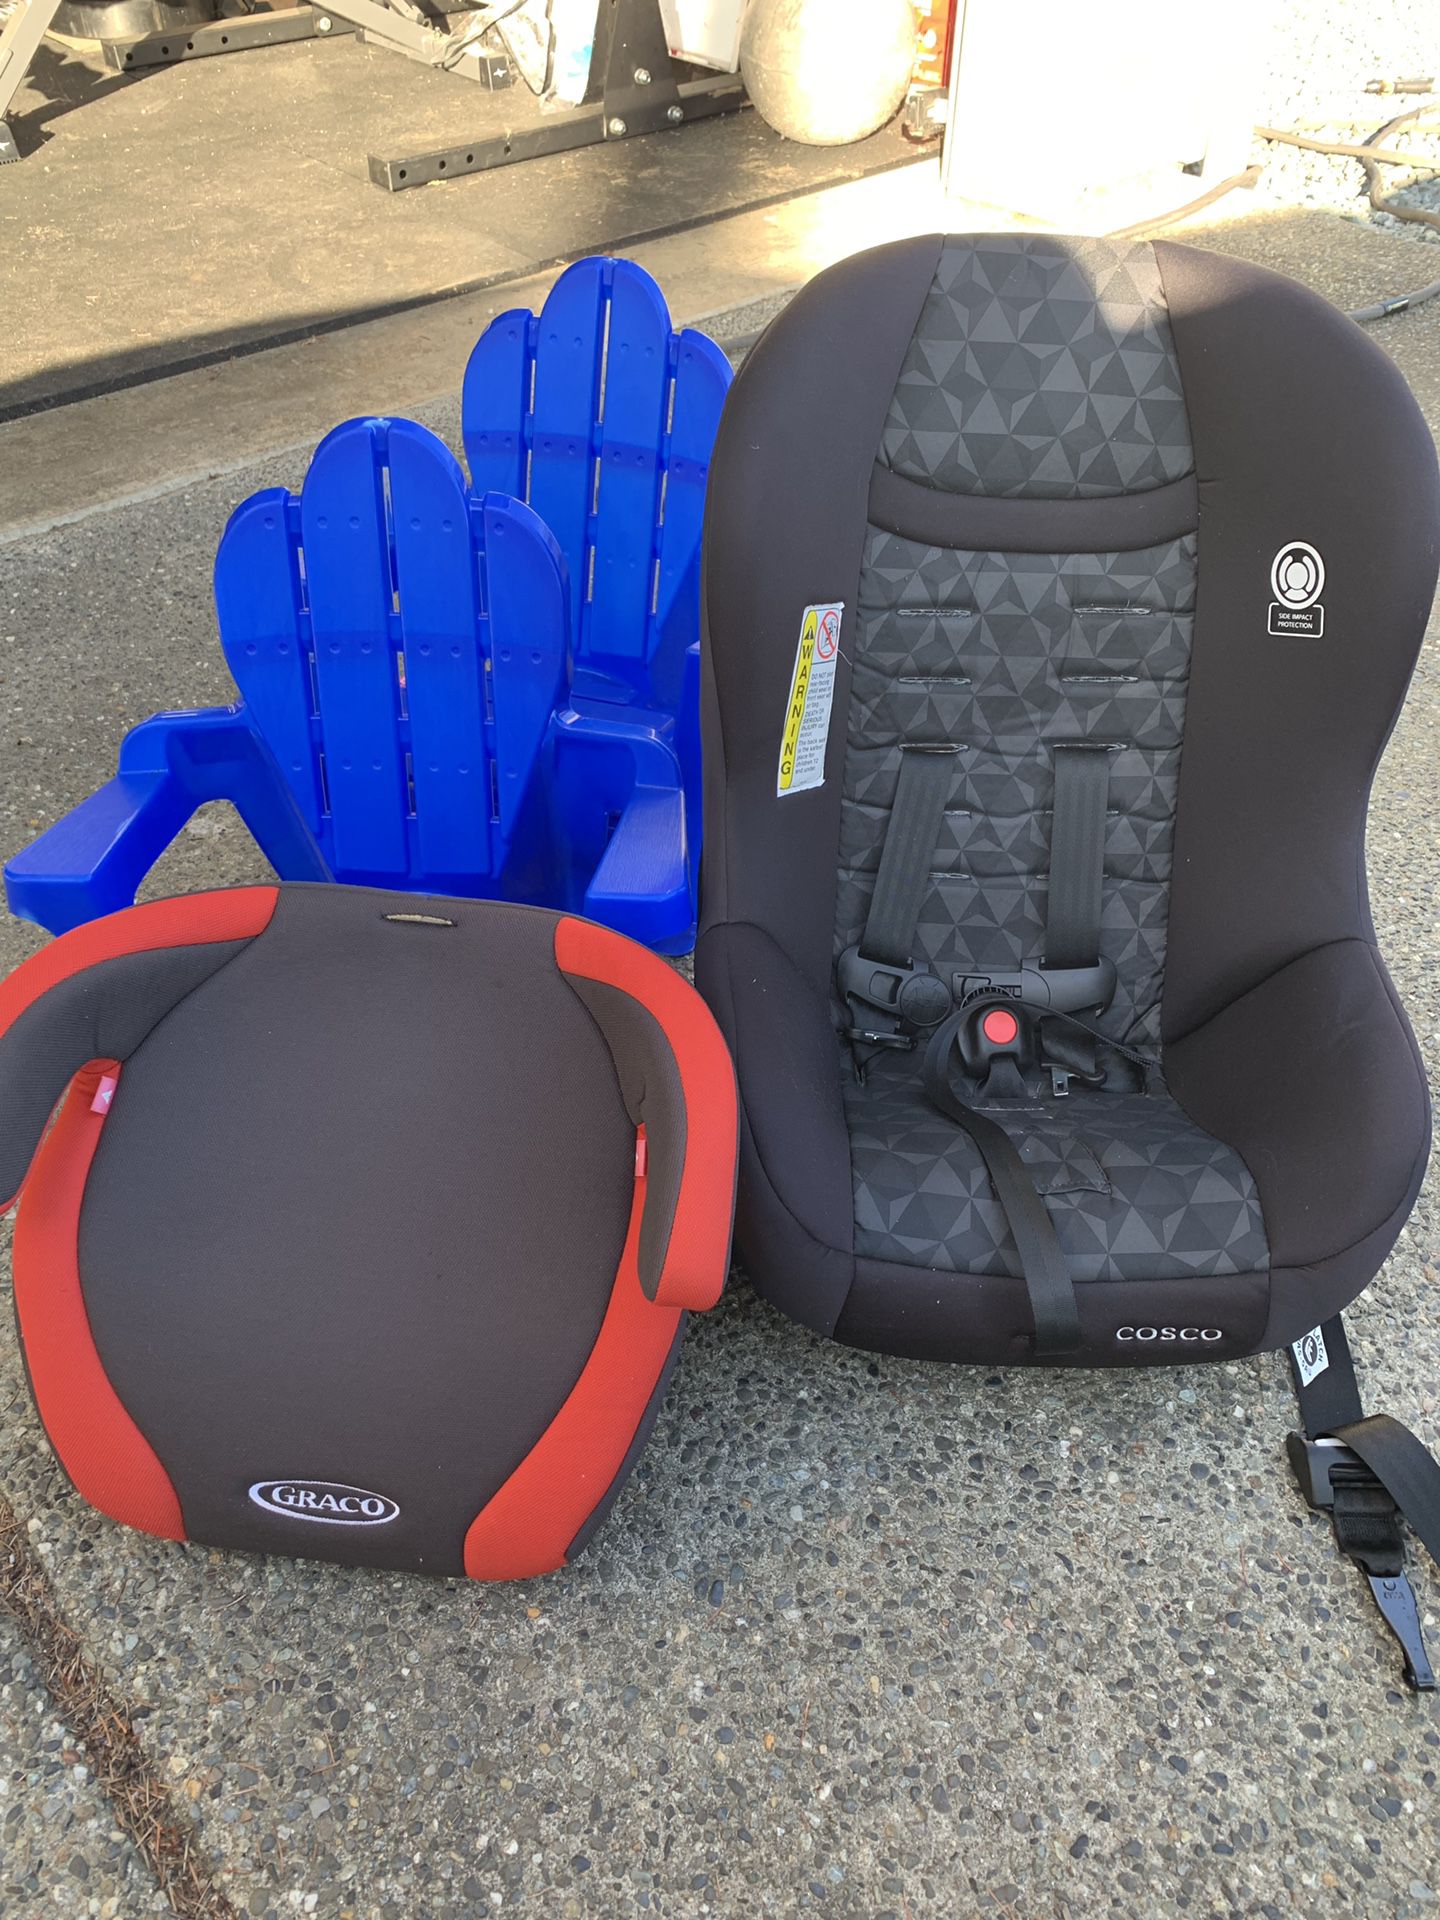 Car seat, booster seat, 2 children’s lawn chairs